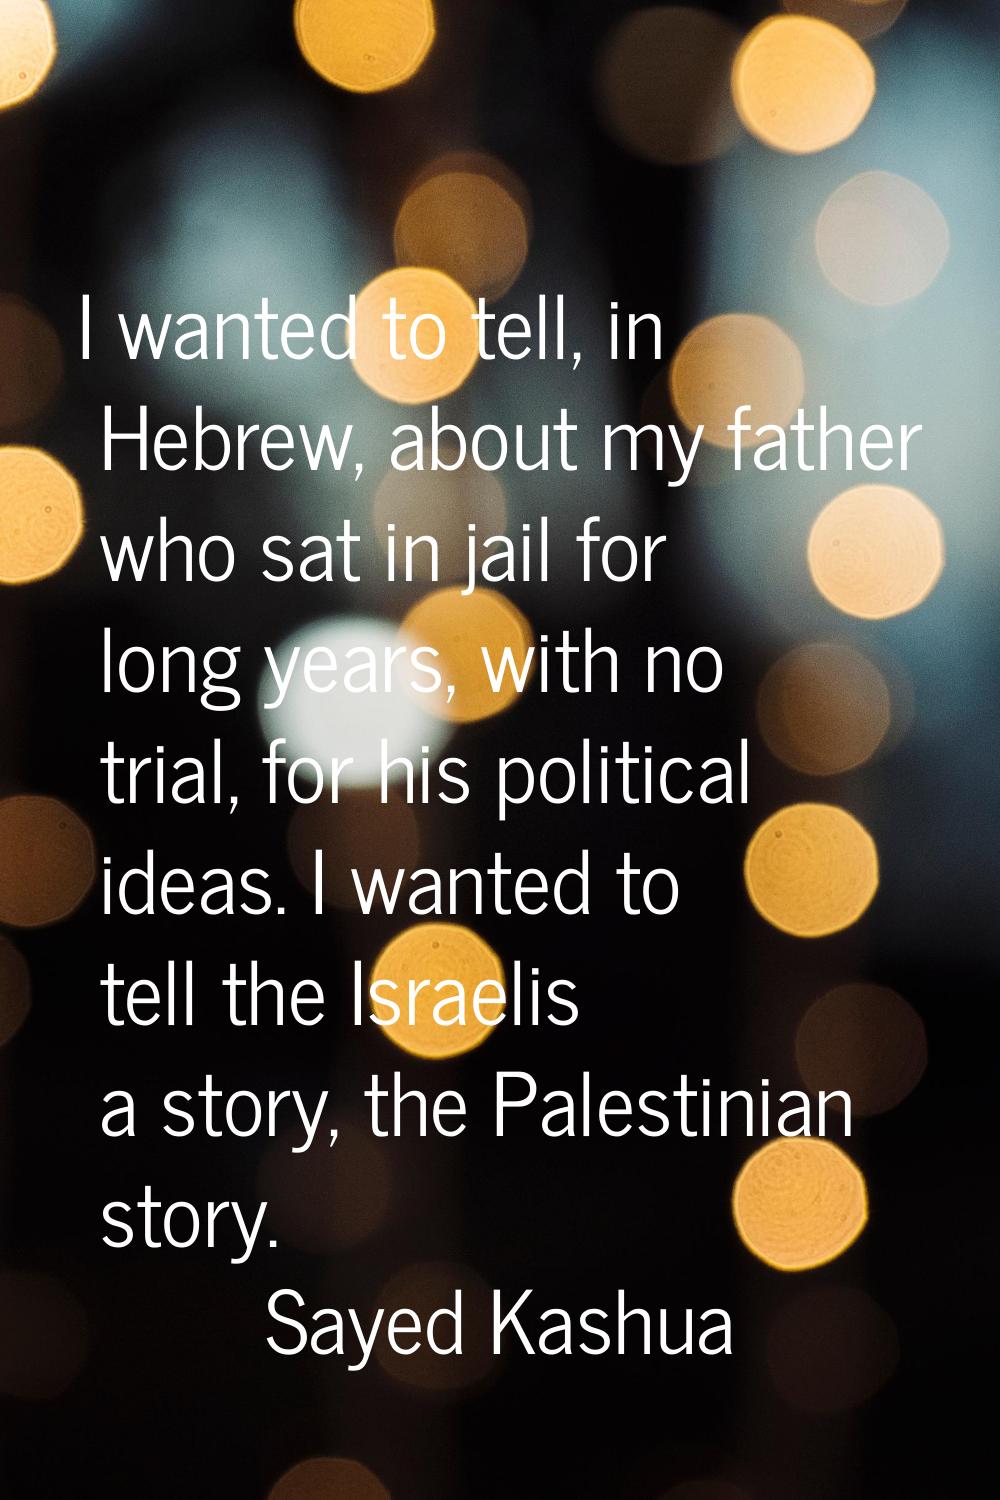 I wanted to tell, in Hebrew, about my father who sat in jail for long years, with no trial, for his